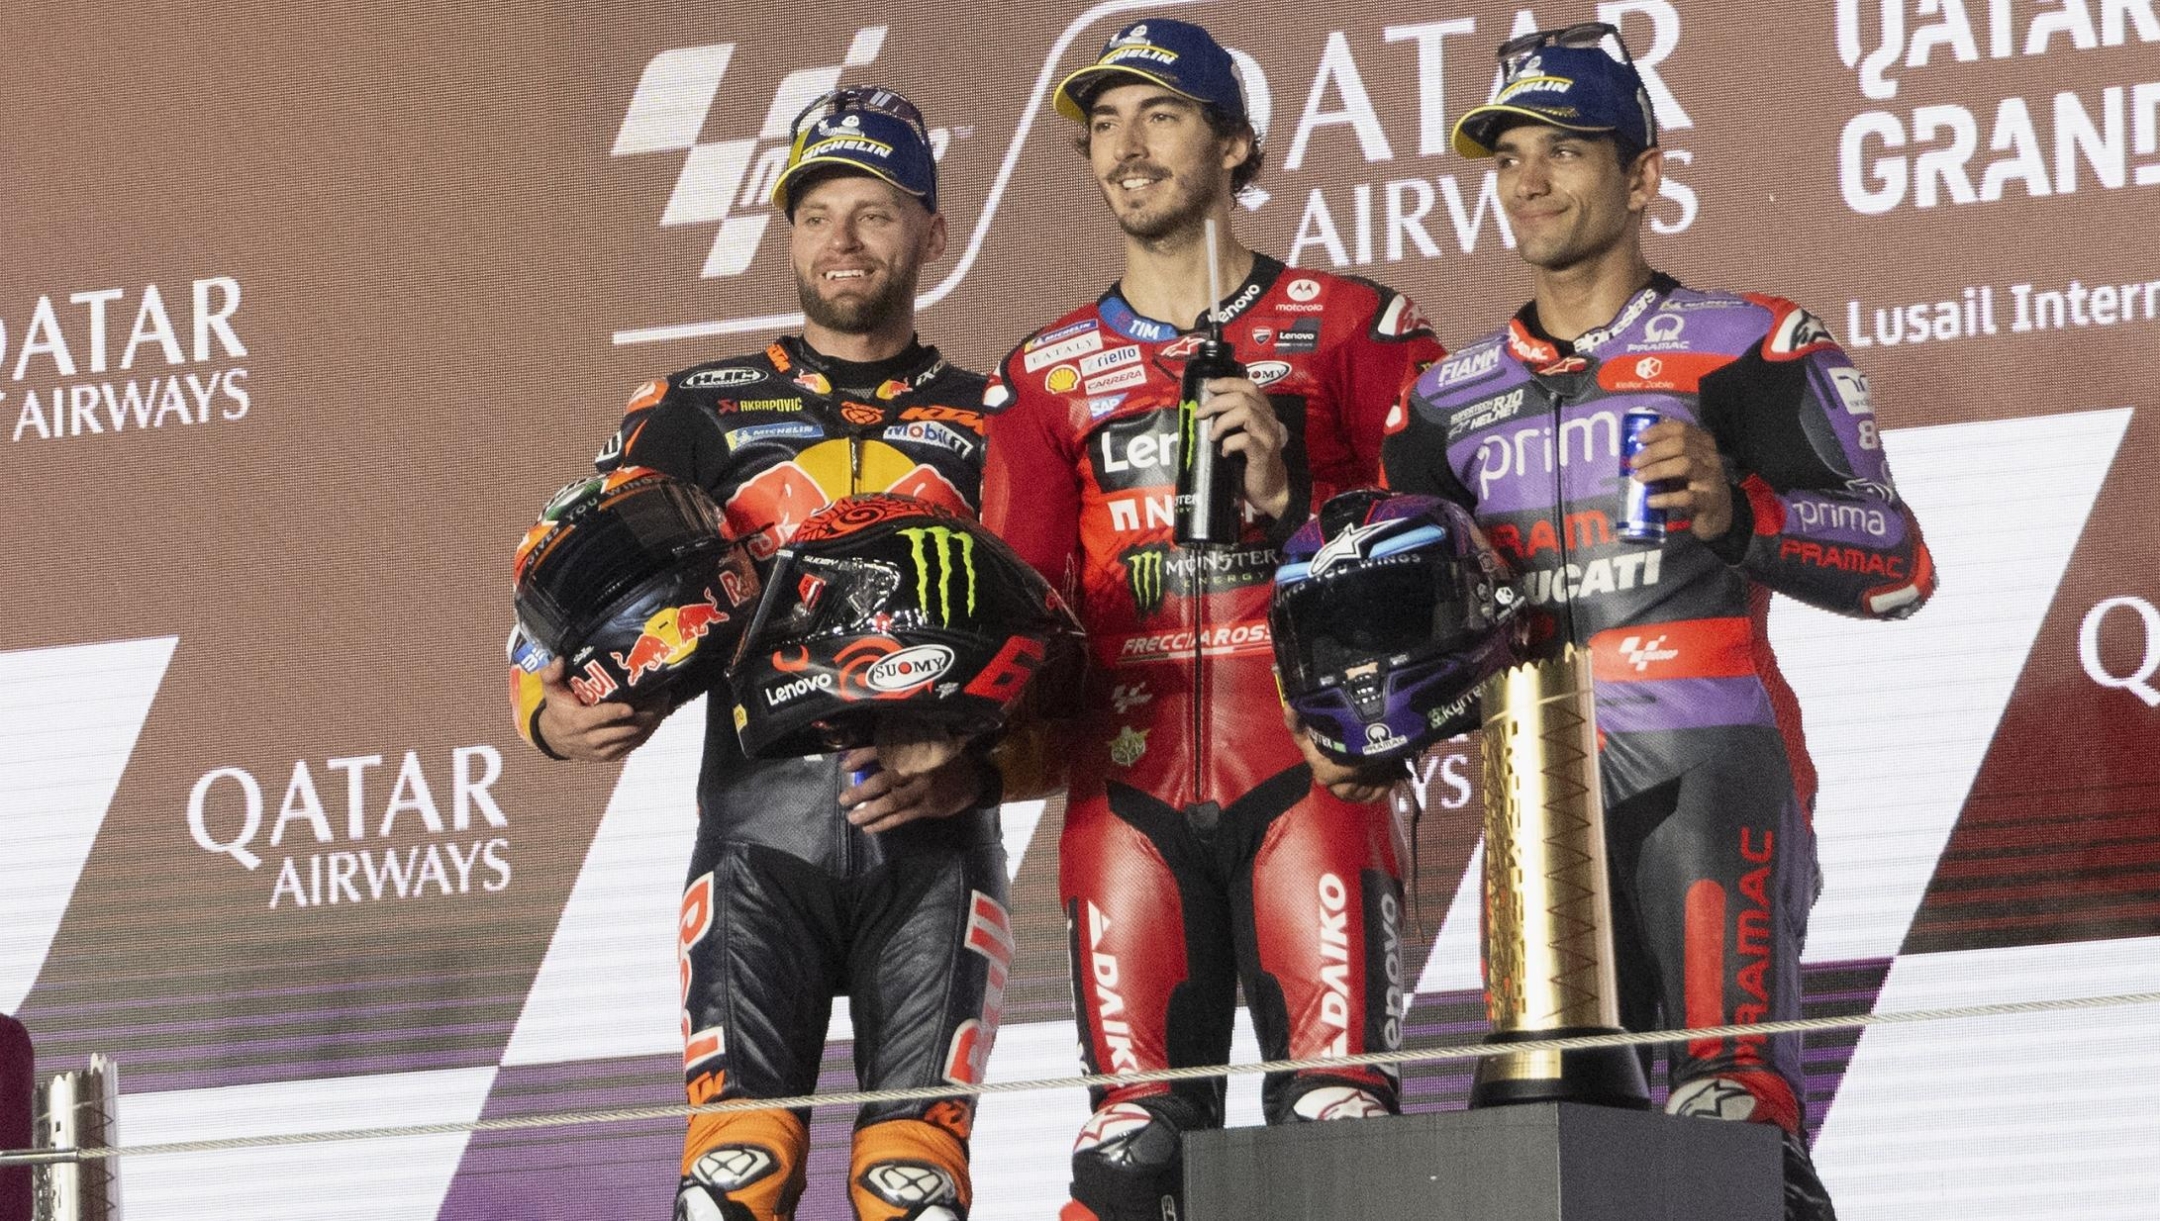 DOHA, QATAR - MARCH 10: (L-R) Brad Binder of South Africa and Red Bull KTM Factory Racing, Francesco Bagnaia of Italy and Ducati Lenovo Team and Jorge Martin of Spain and Prima Pramac Racing celebrate on the podium at the end of the MotoGP race  during the MotoGP Of Qatar - Race at Losail Circuit on March 10, 2024 in Doha, Qatar. (Photo by Mirco Lazzari gp/Getty Images)